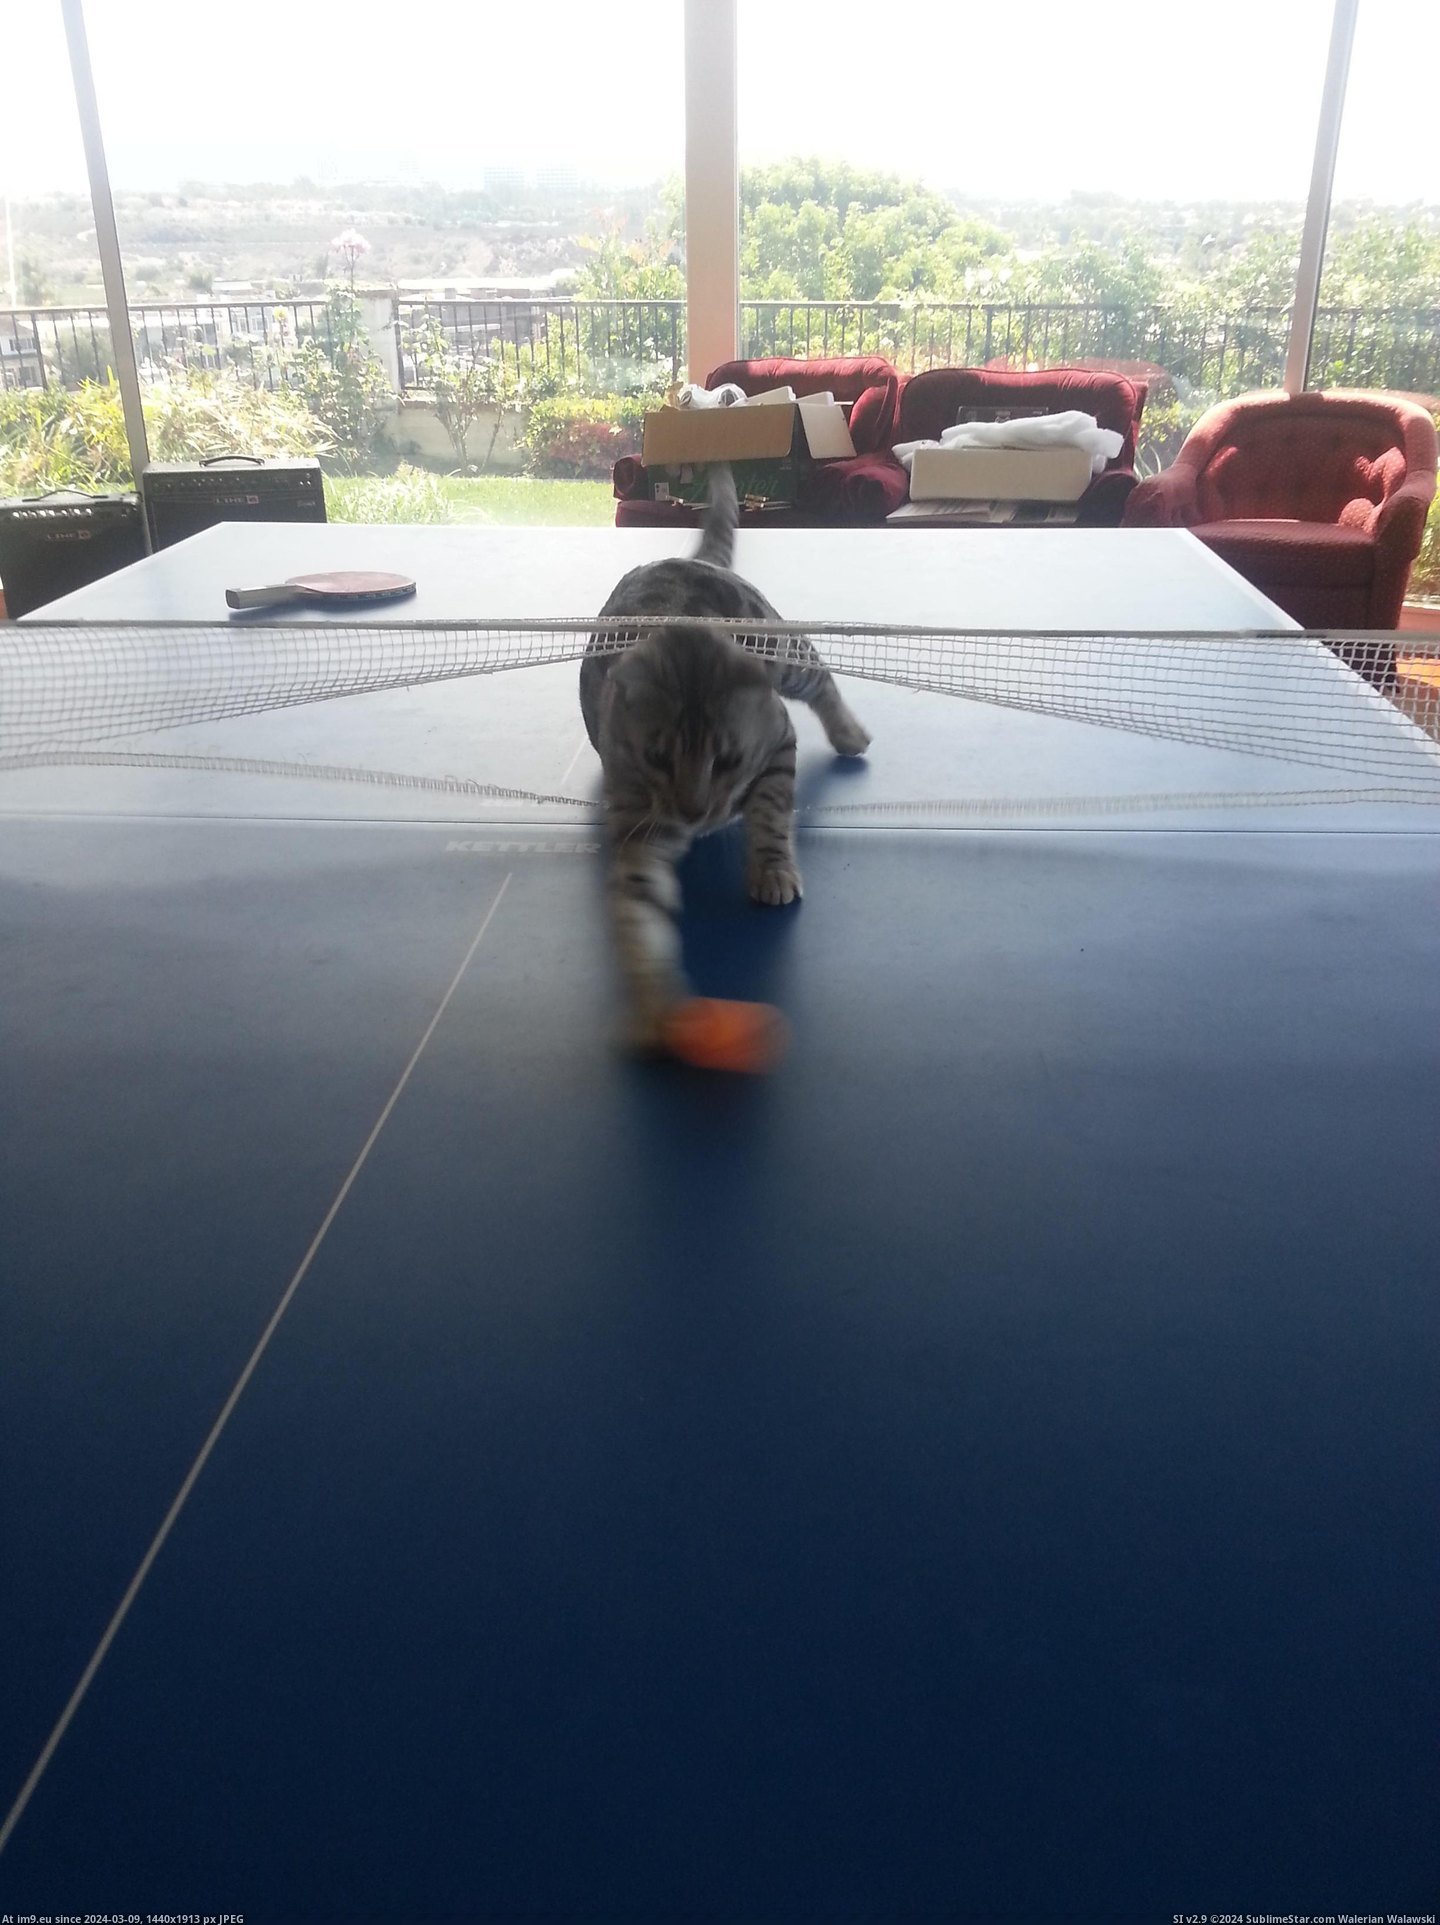 #Cats #Tennis #Cheats #Playing [Cats] He cheats while playing table tennis. Pic. (Bild von album My r/CATS favs))